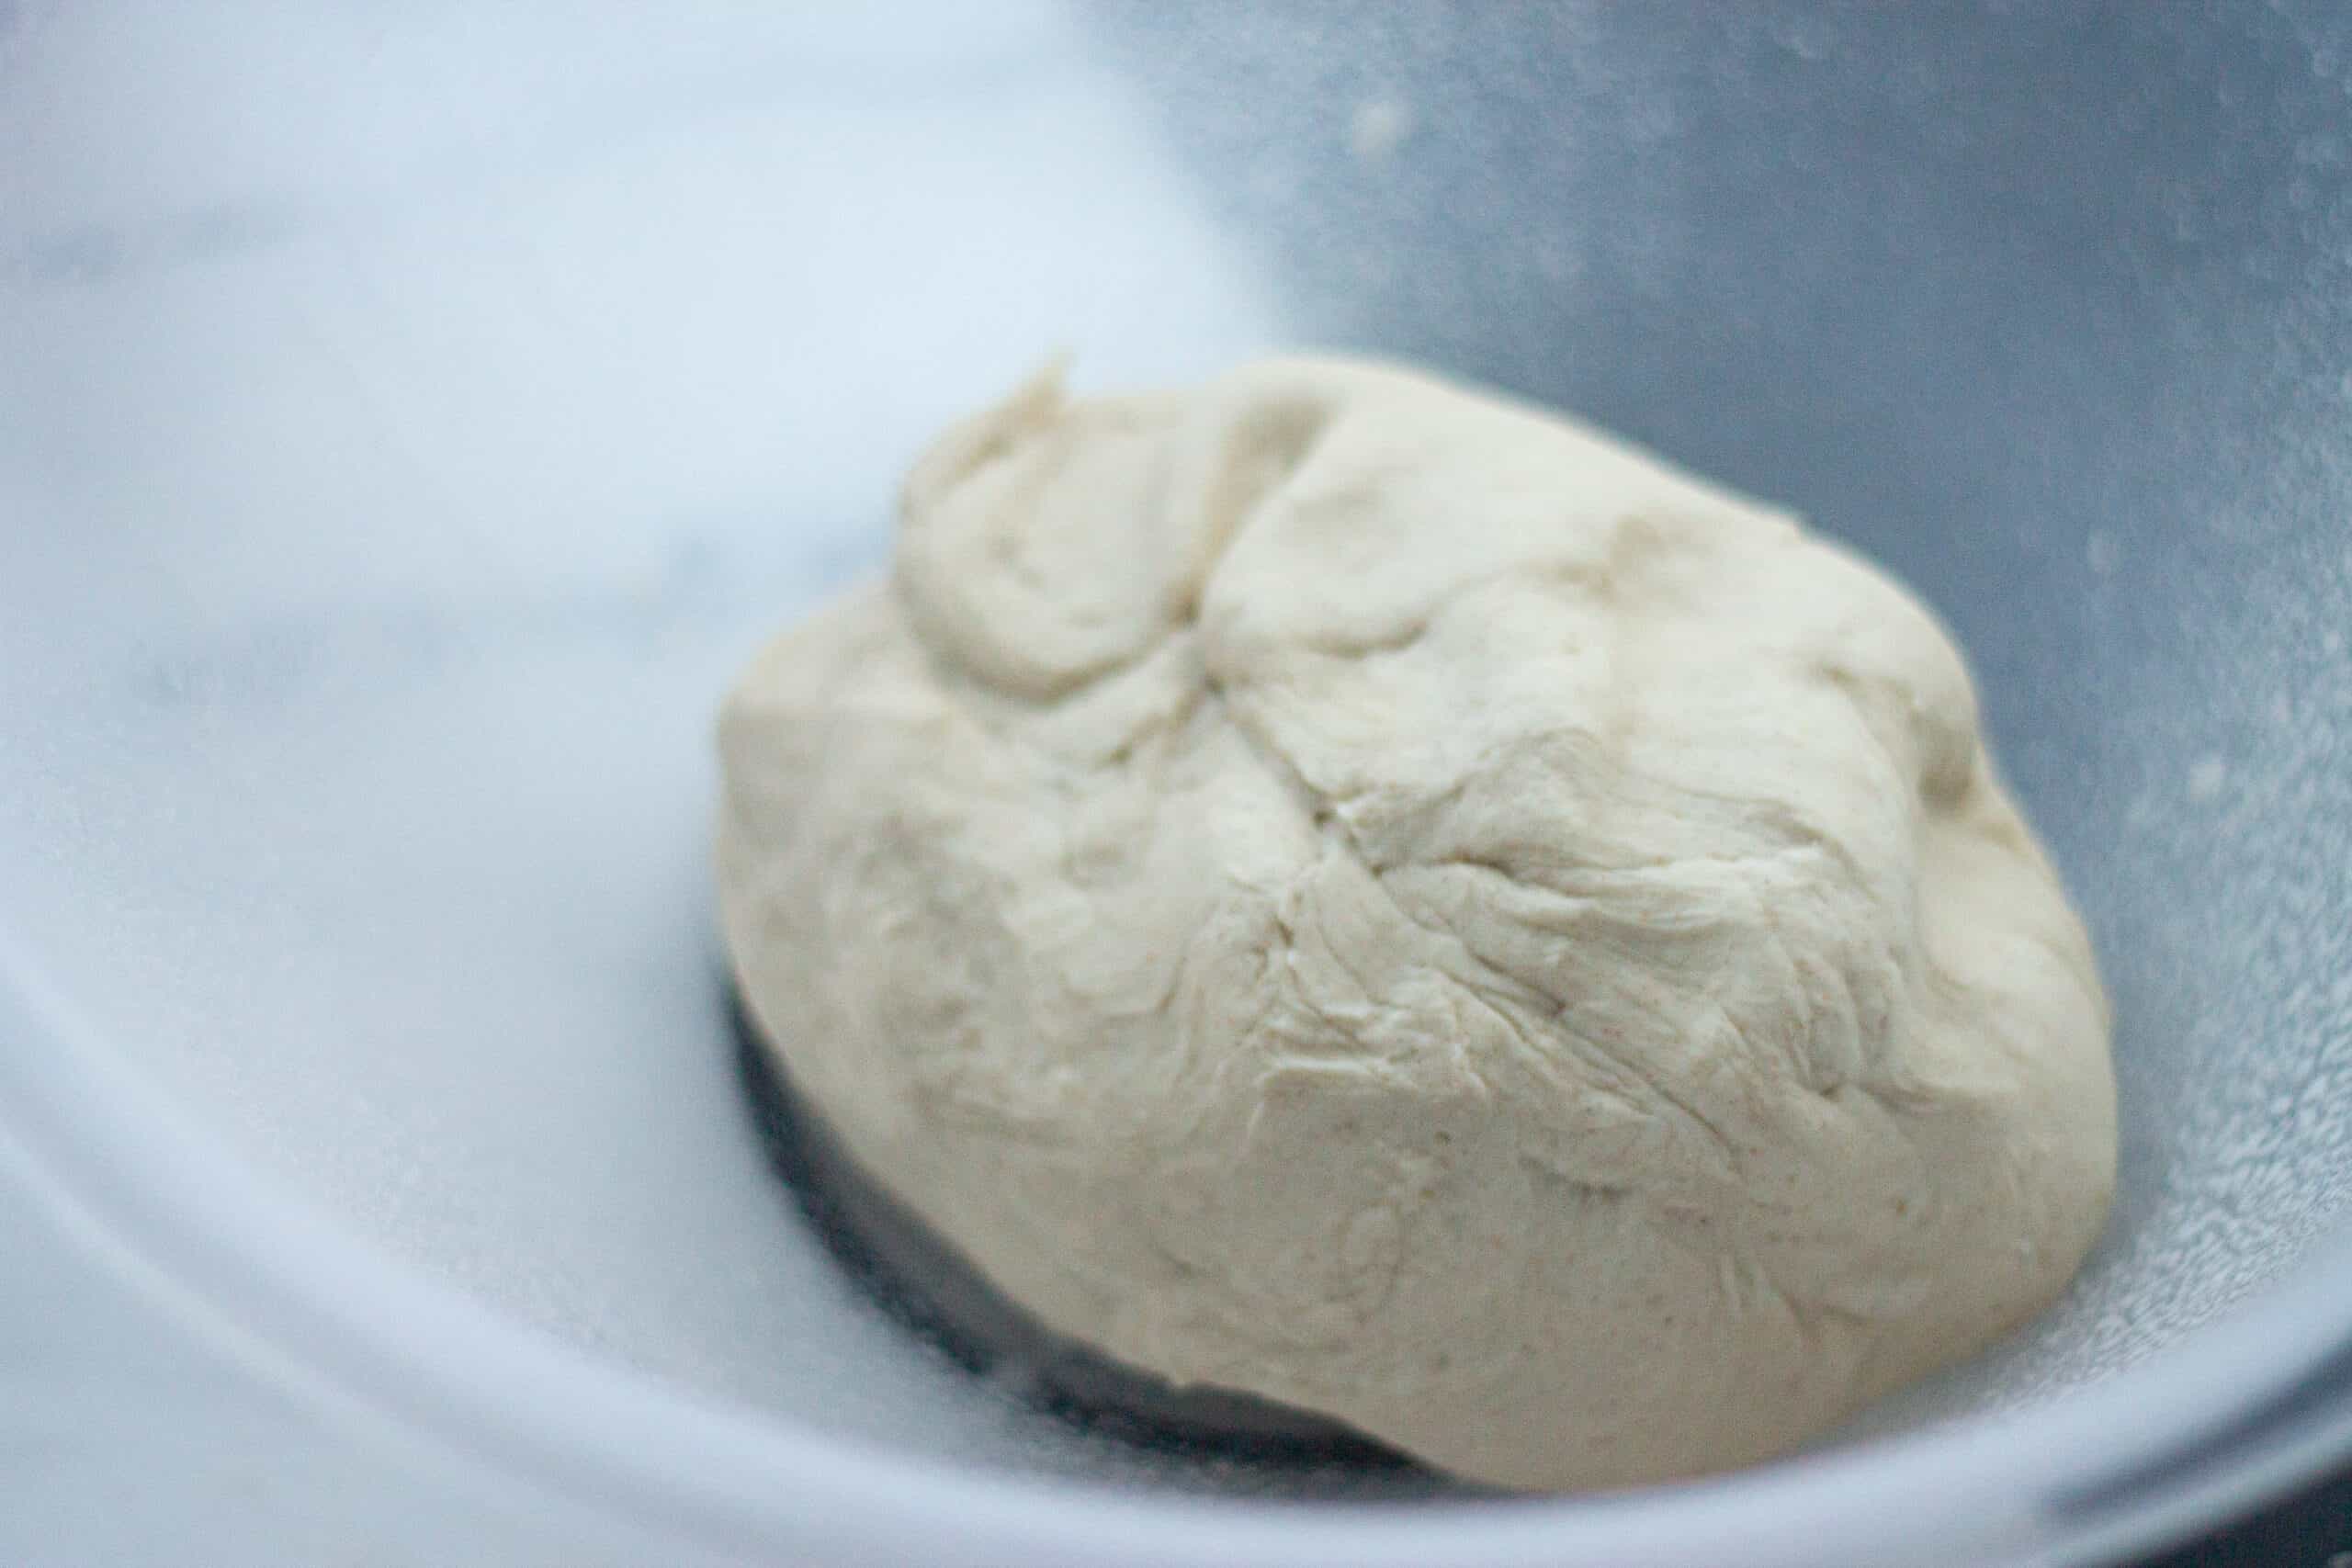 Leave the dough to rise for at least an hour